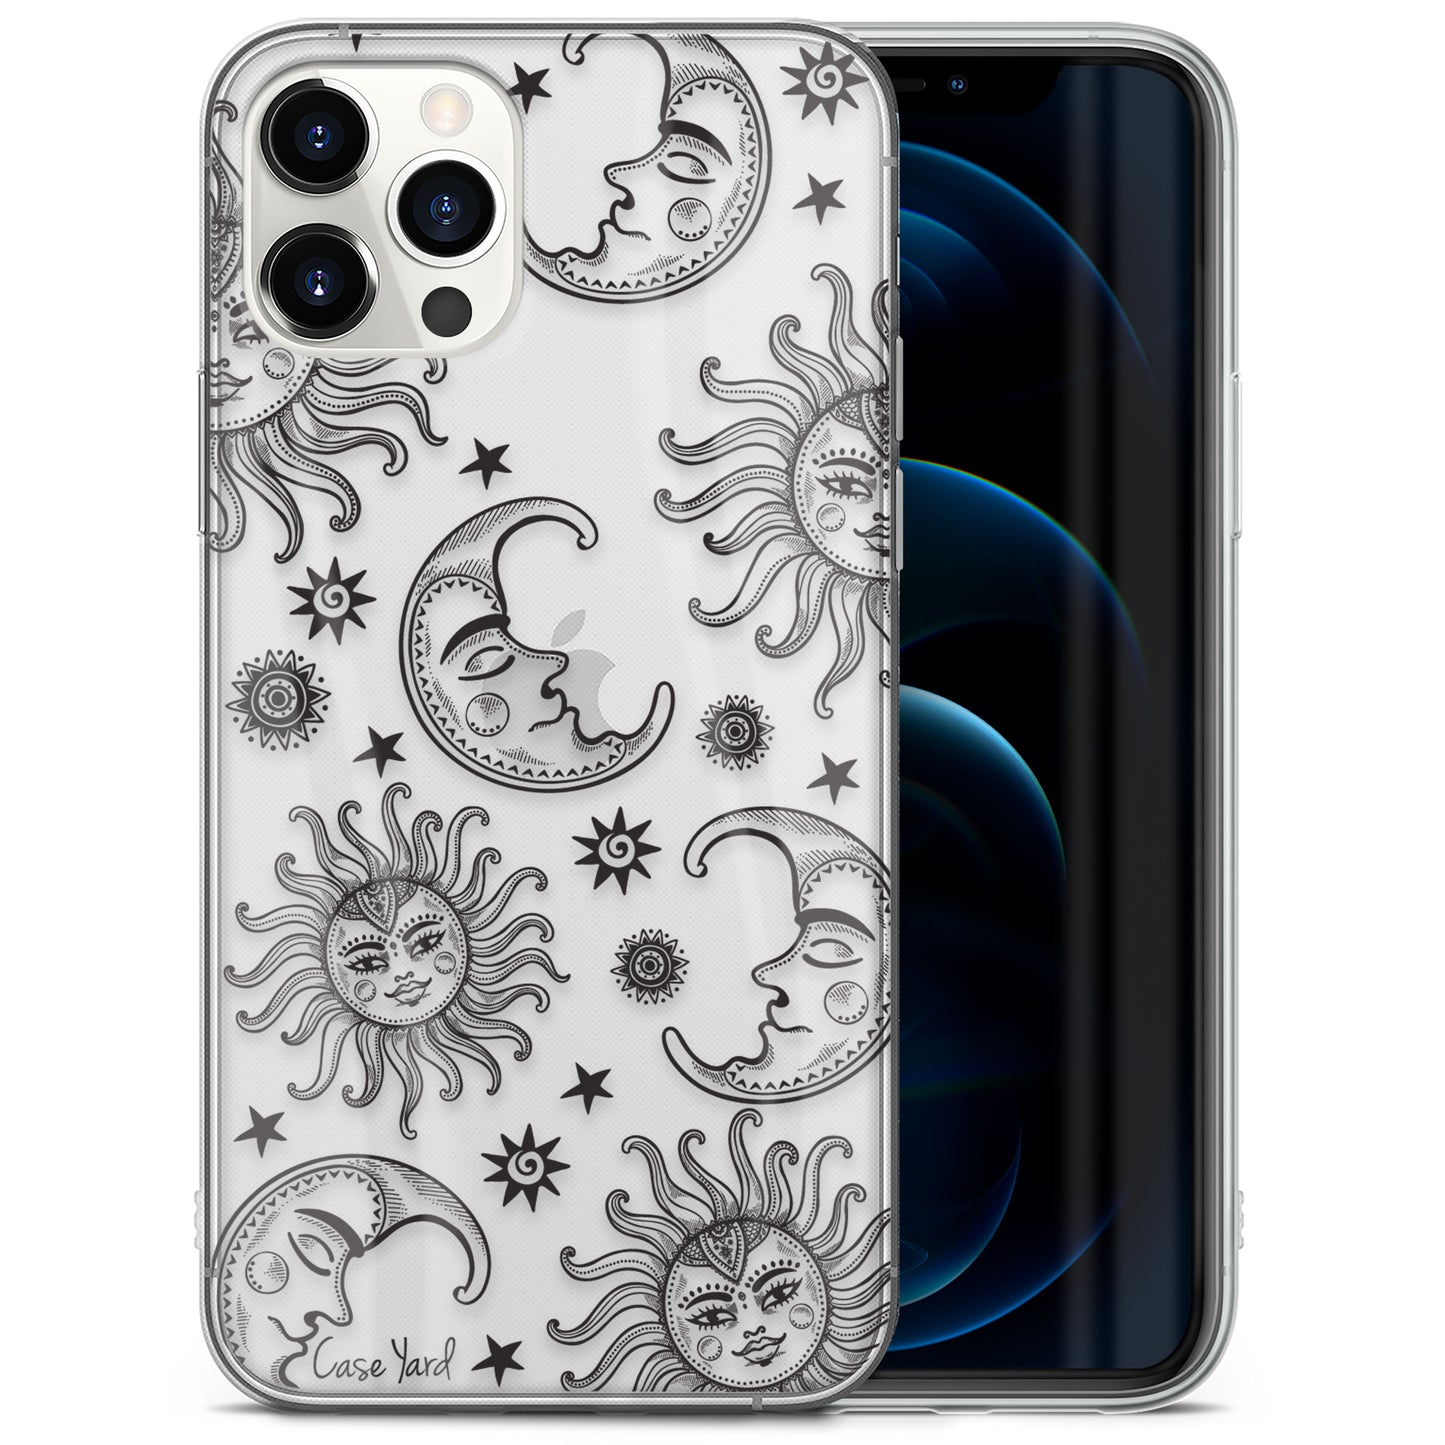 TPU Clear case with (Moon and Stars) Design for iPhone & Samsung Phones